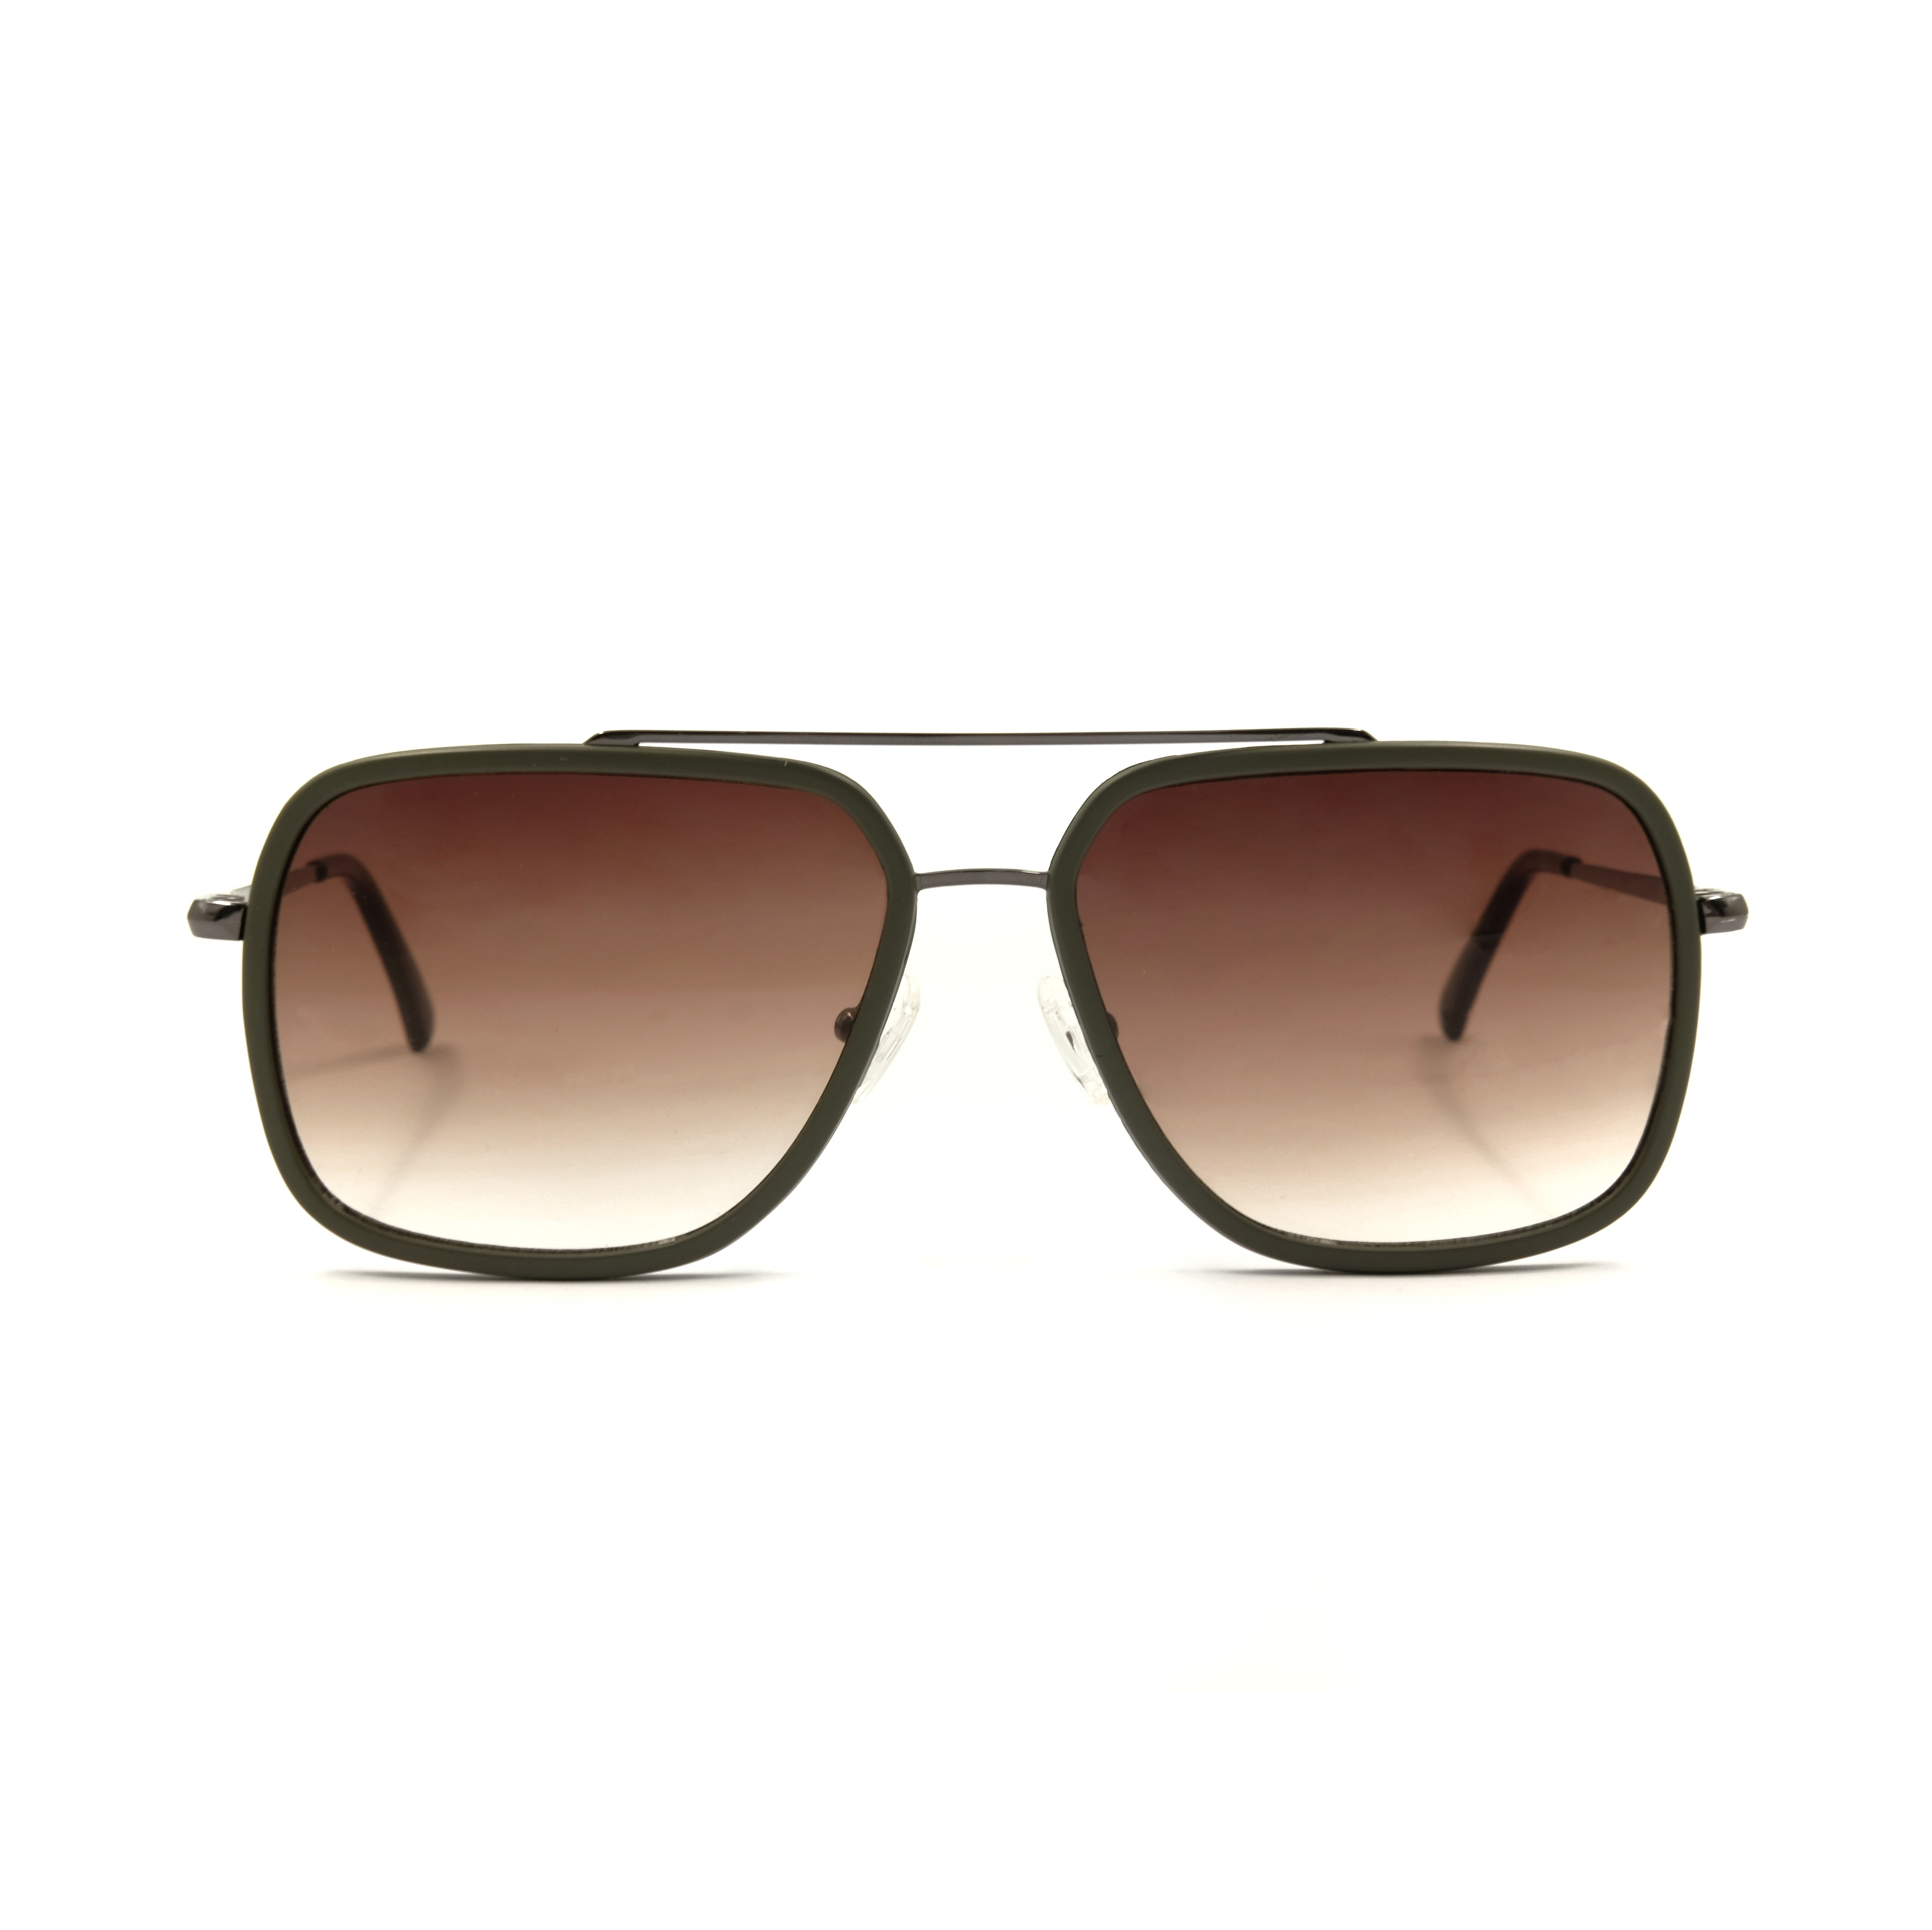 Metal Acetate Double Frame Coffee Gradient Lens Sunglasses Online Eyeglass Companies Spectacle Manufacturers